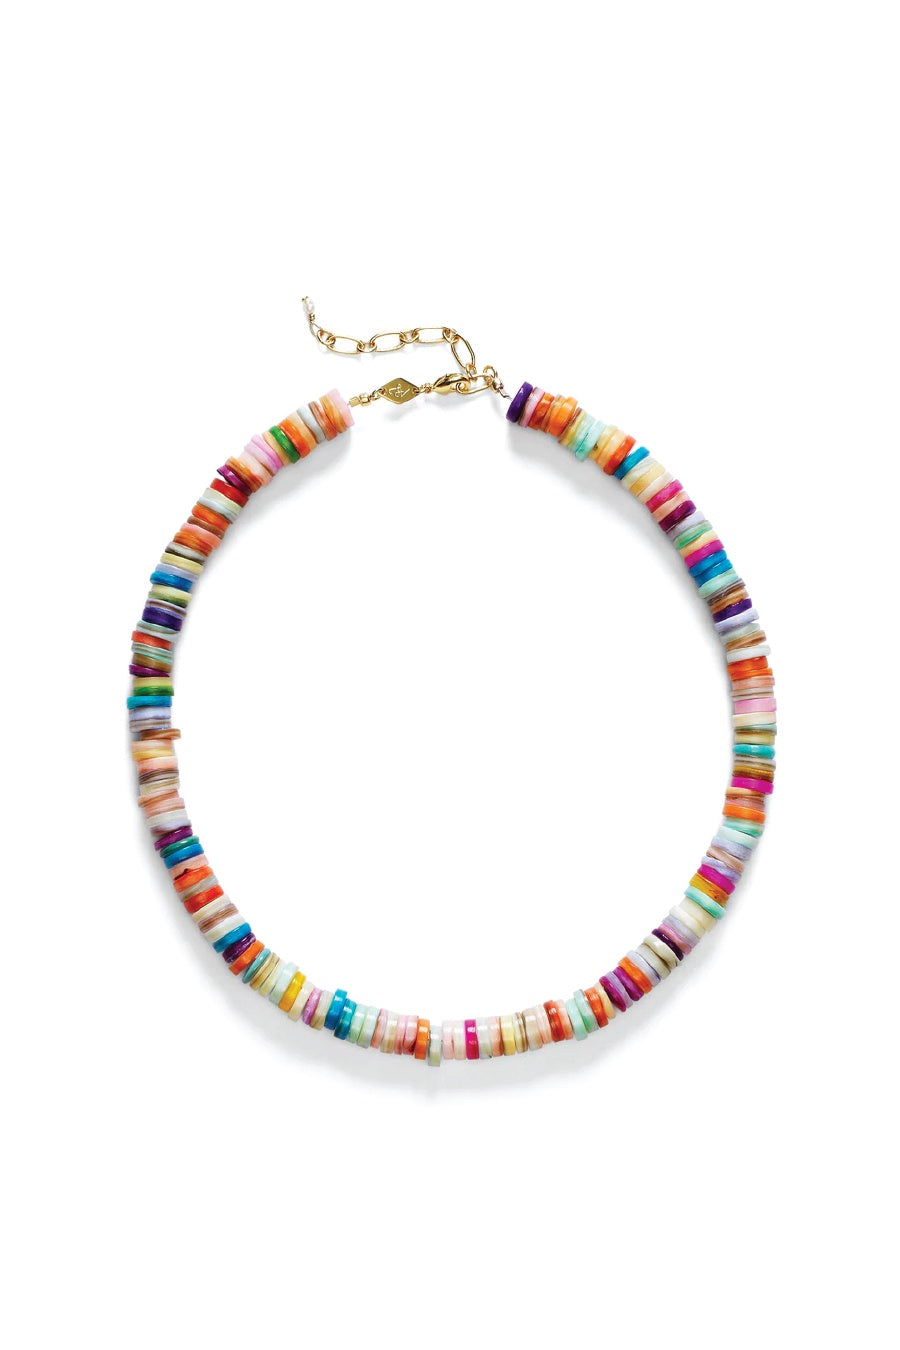 Anni Lu Holiday Dyed Shell Necklace - Multi